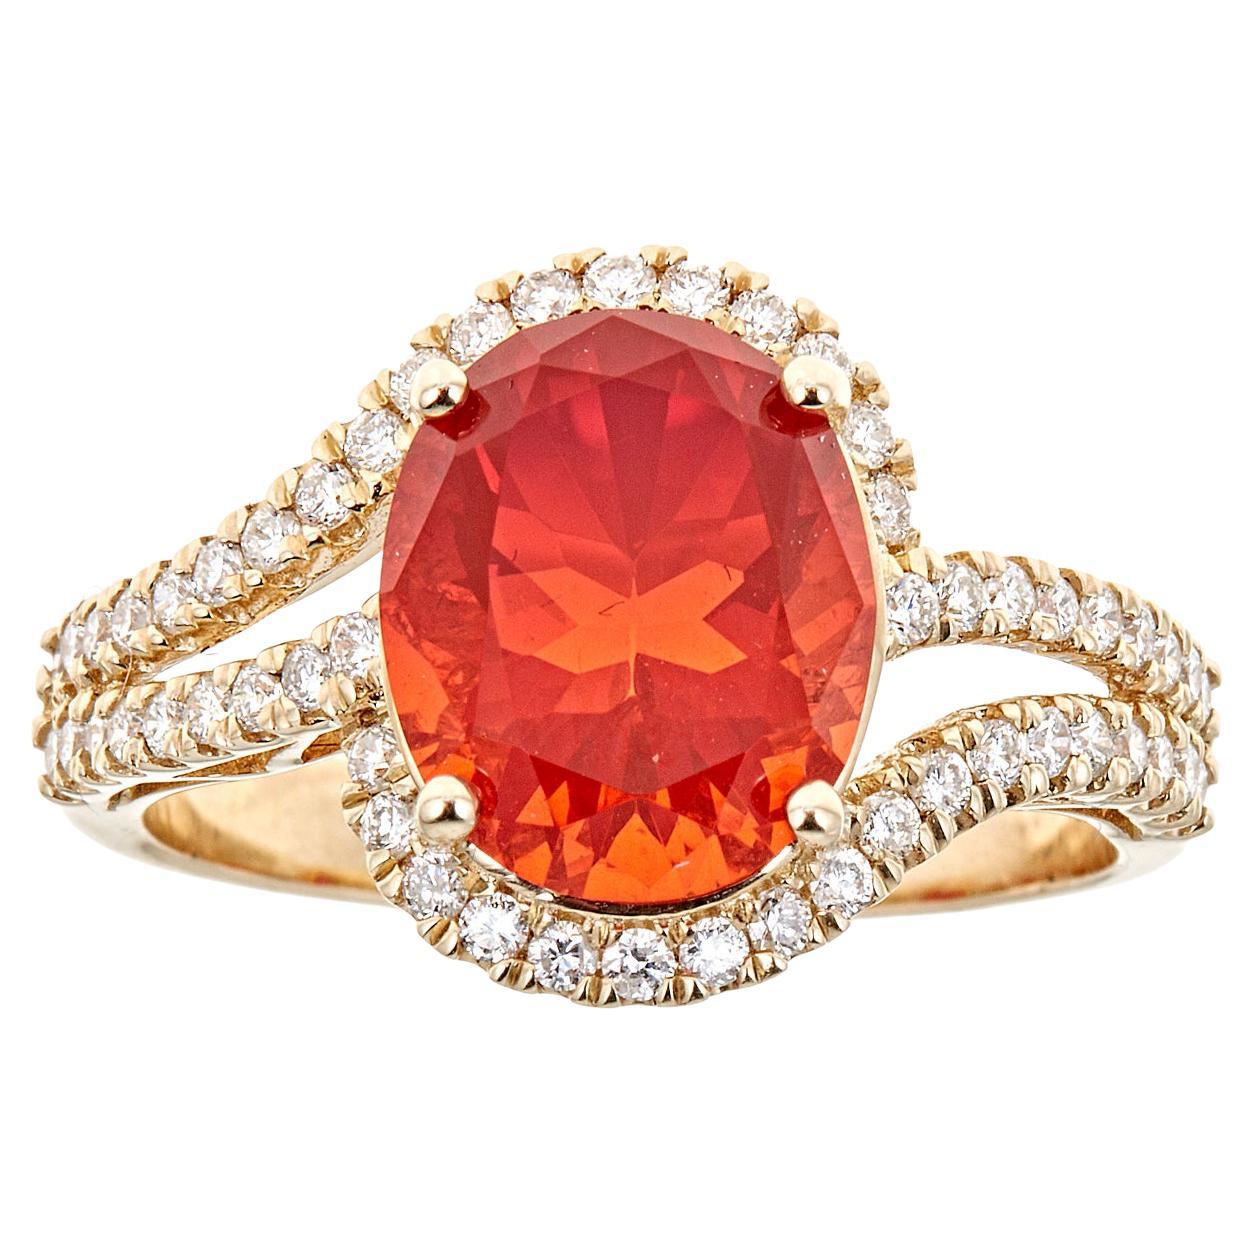 Classic 2.17 Carat Oval-Cut Fire Opal Accented with White Diamond 14k Yg Ring